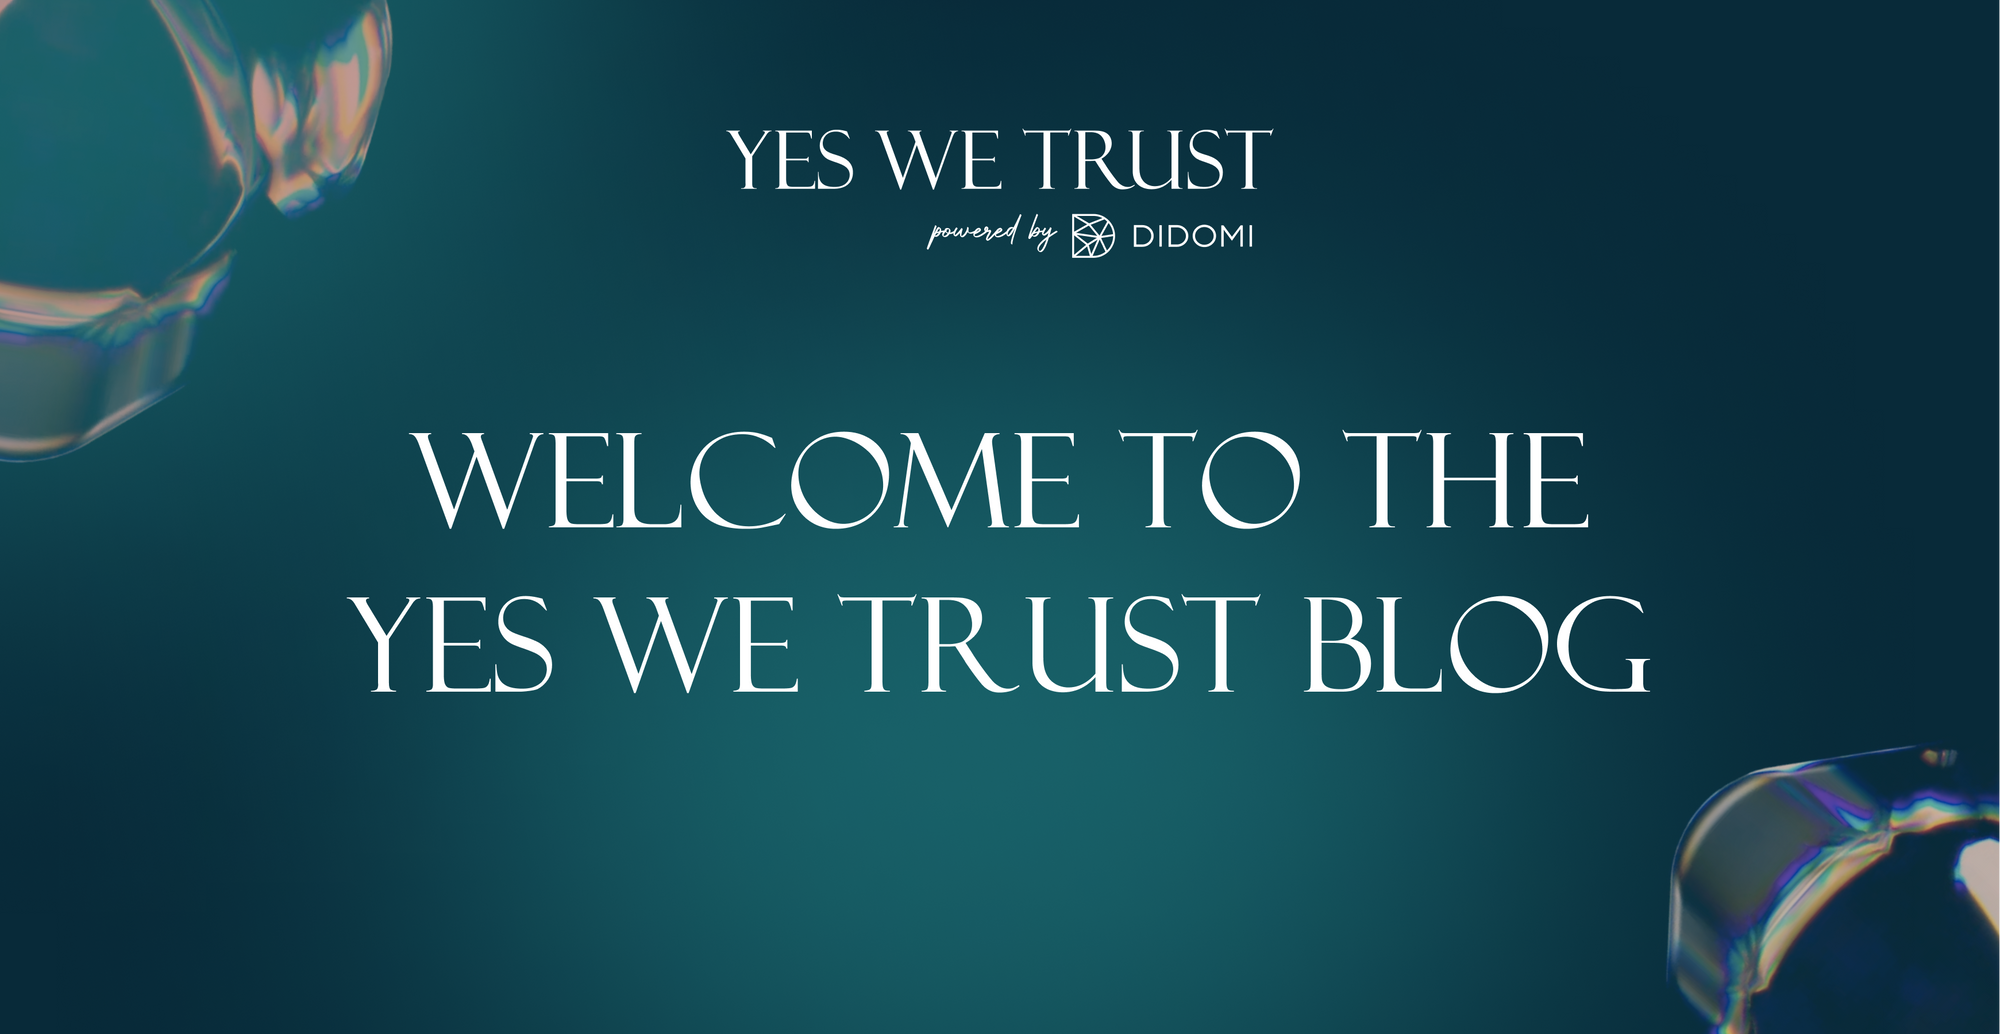 YWT welcome to the yes we trust blog